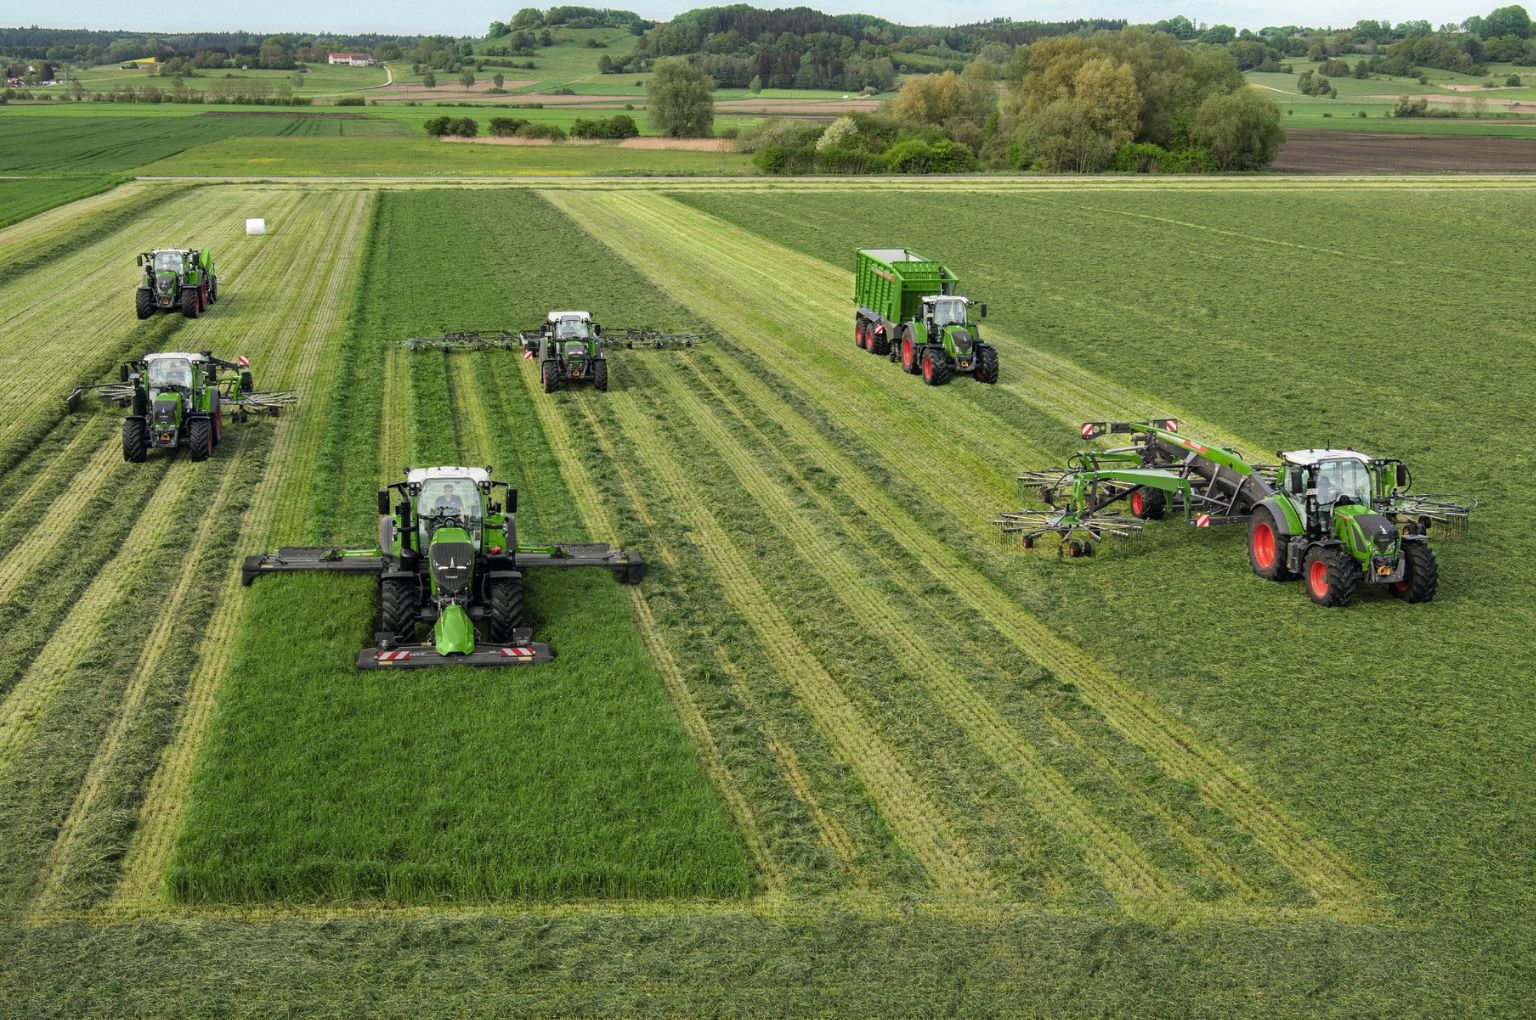 25,000 Fendt machines, built in Feucht, Germany